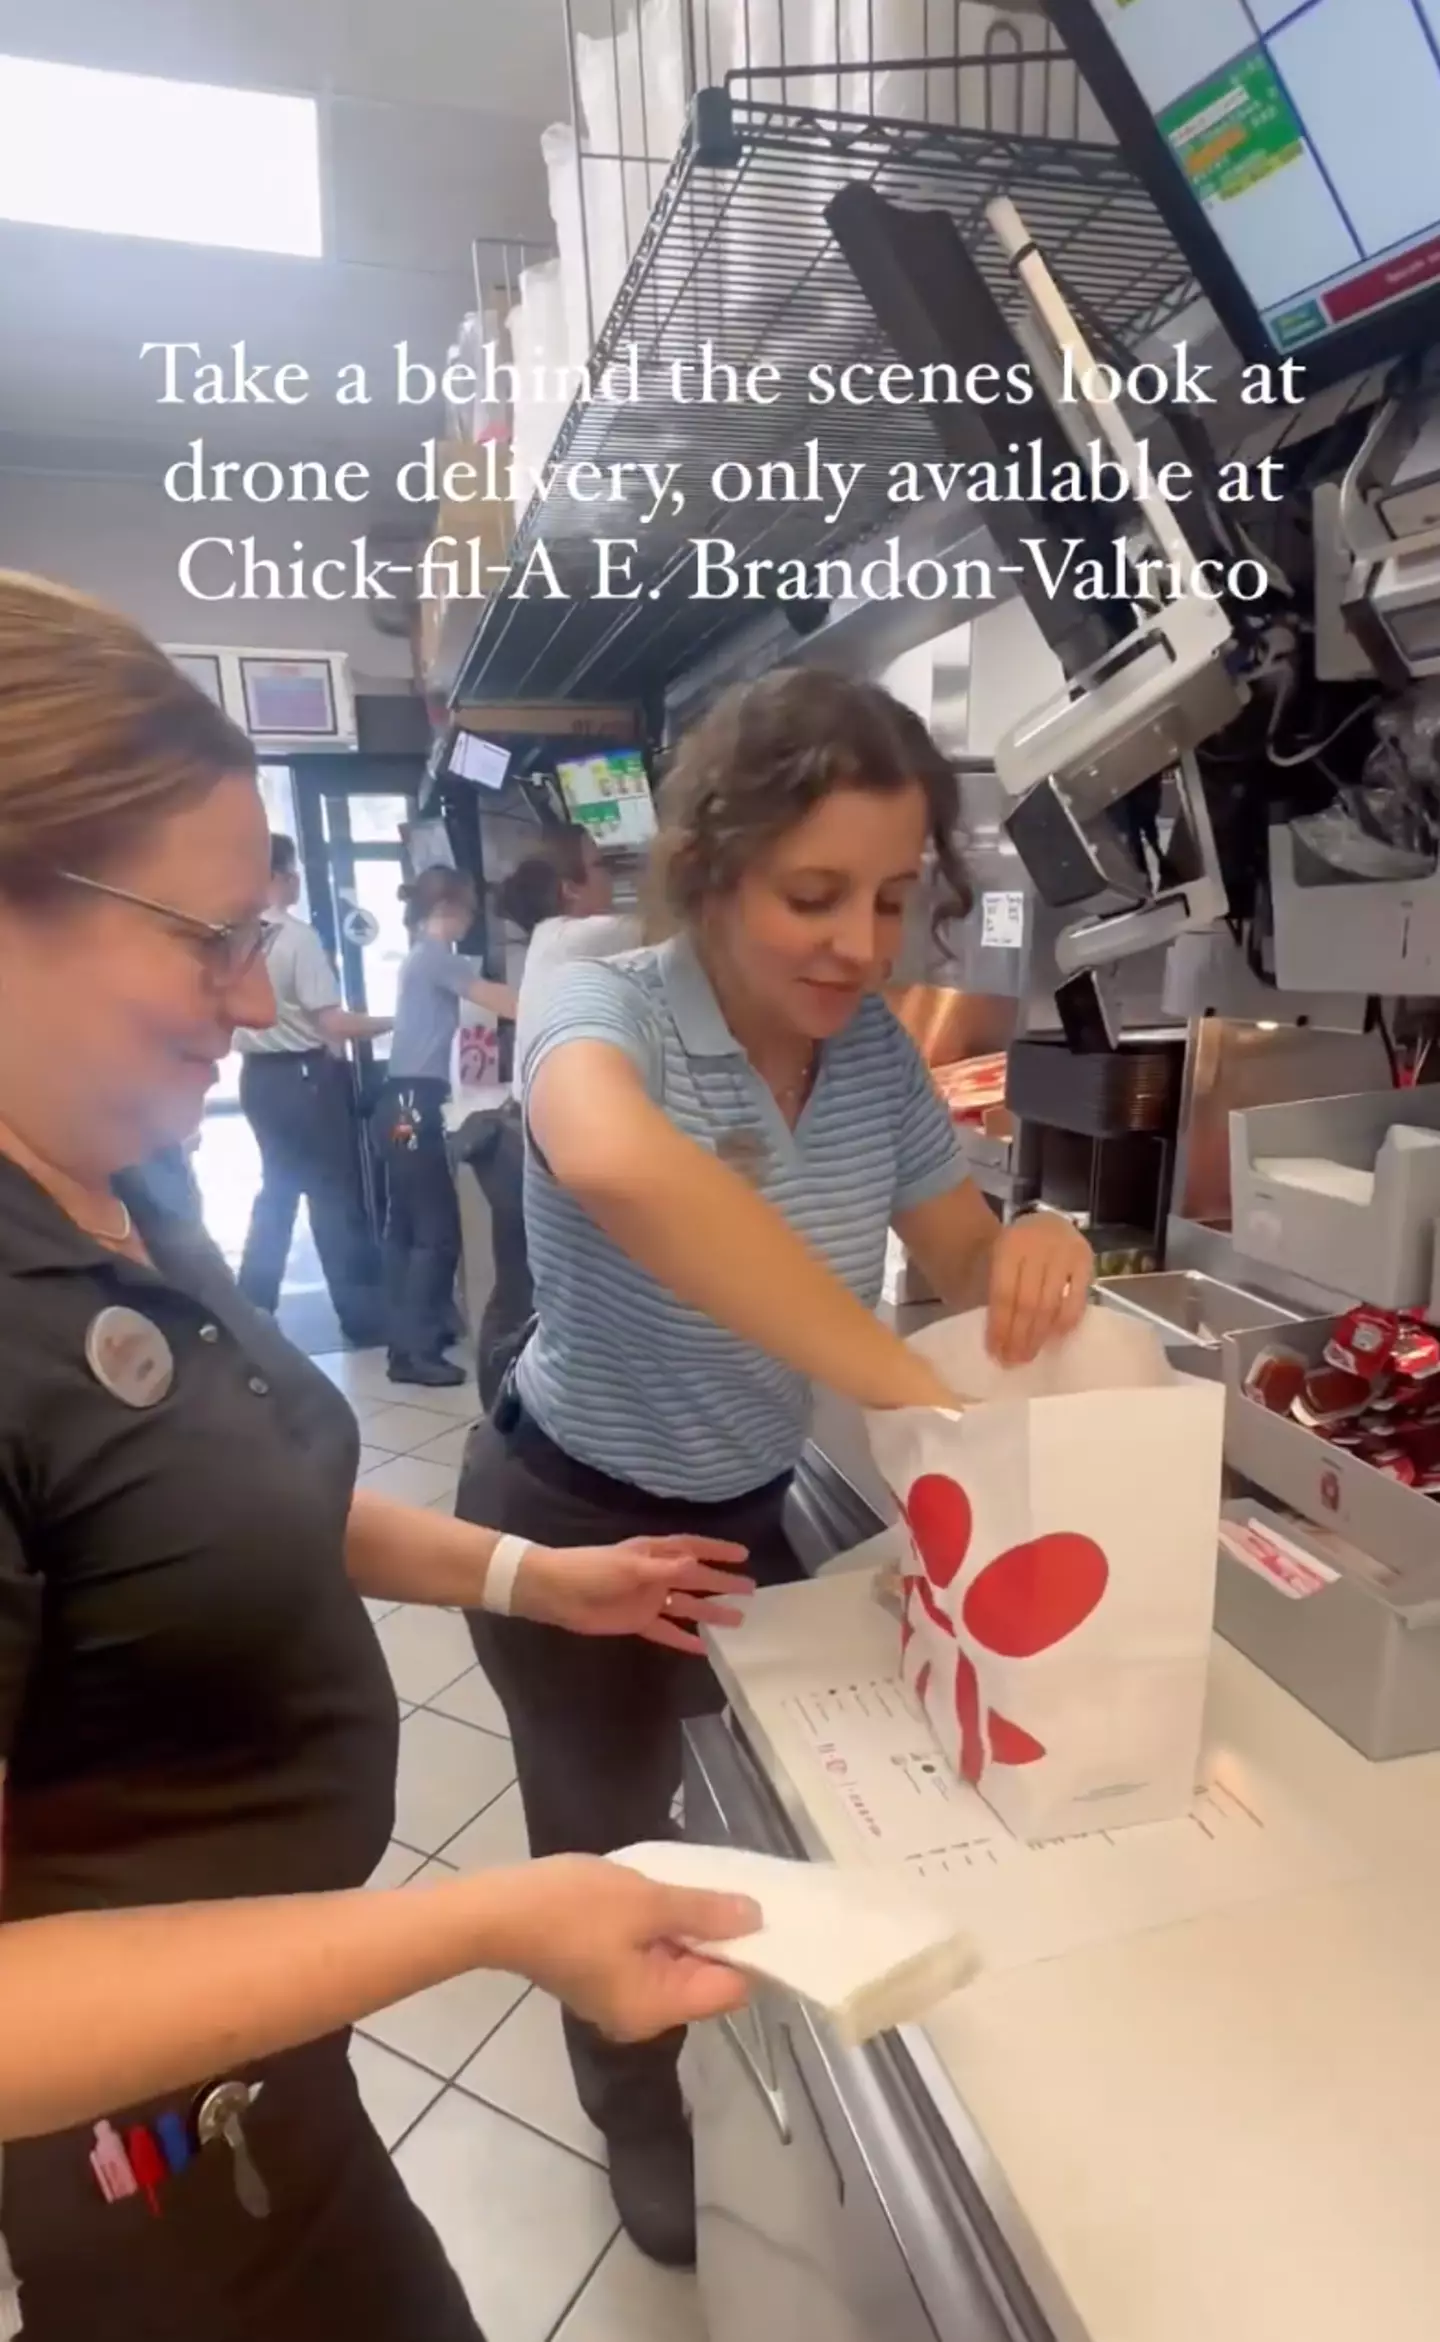 Food at a Central Florida Chick-Fil-A location is packaged up before it is delivered to customers via drone.